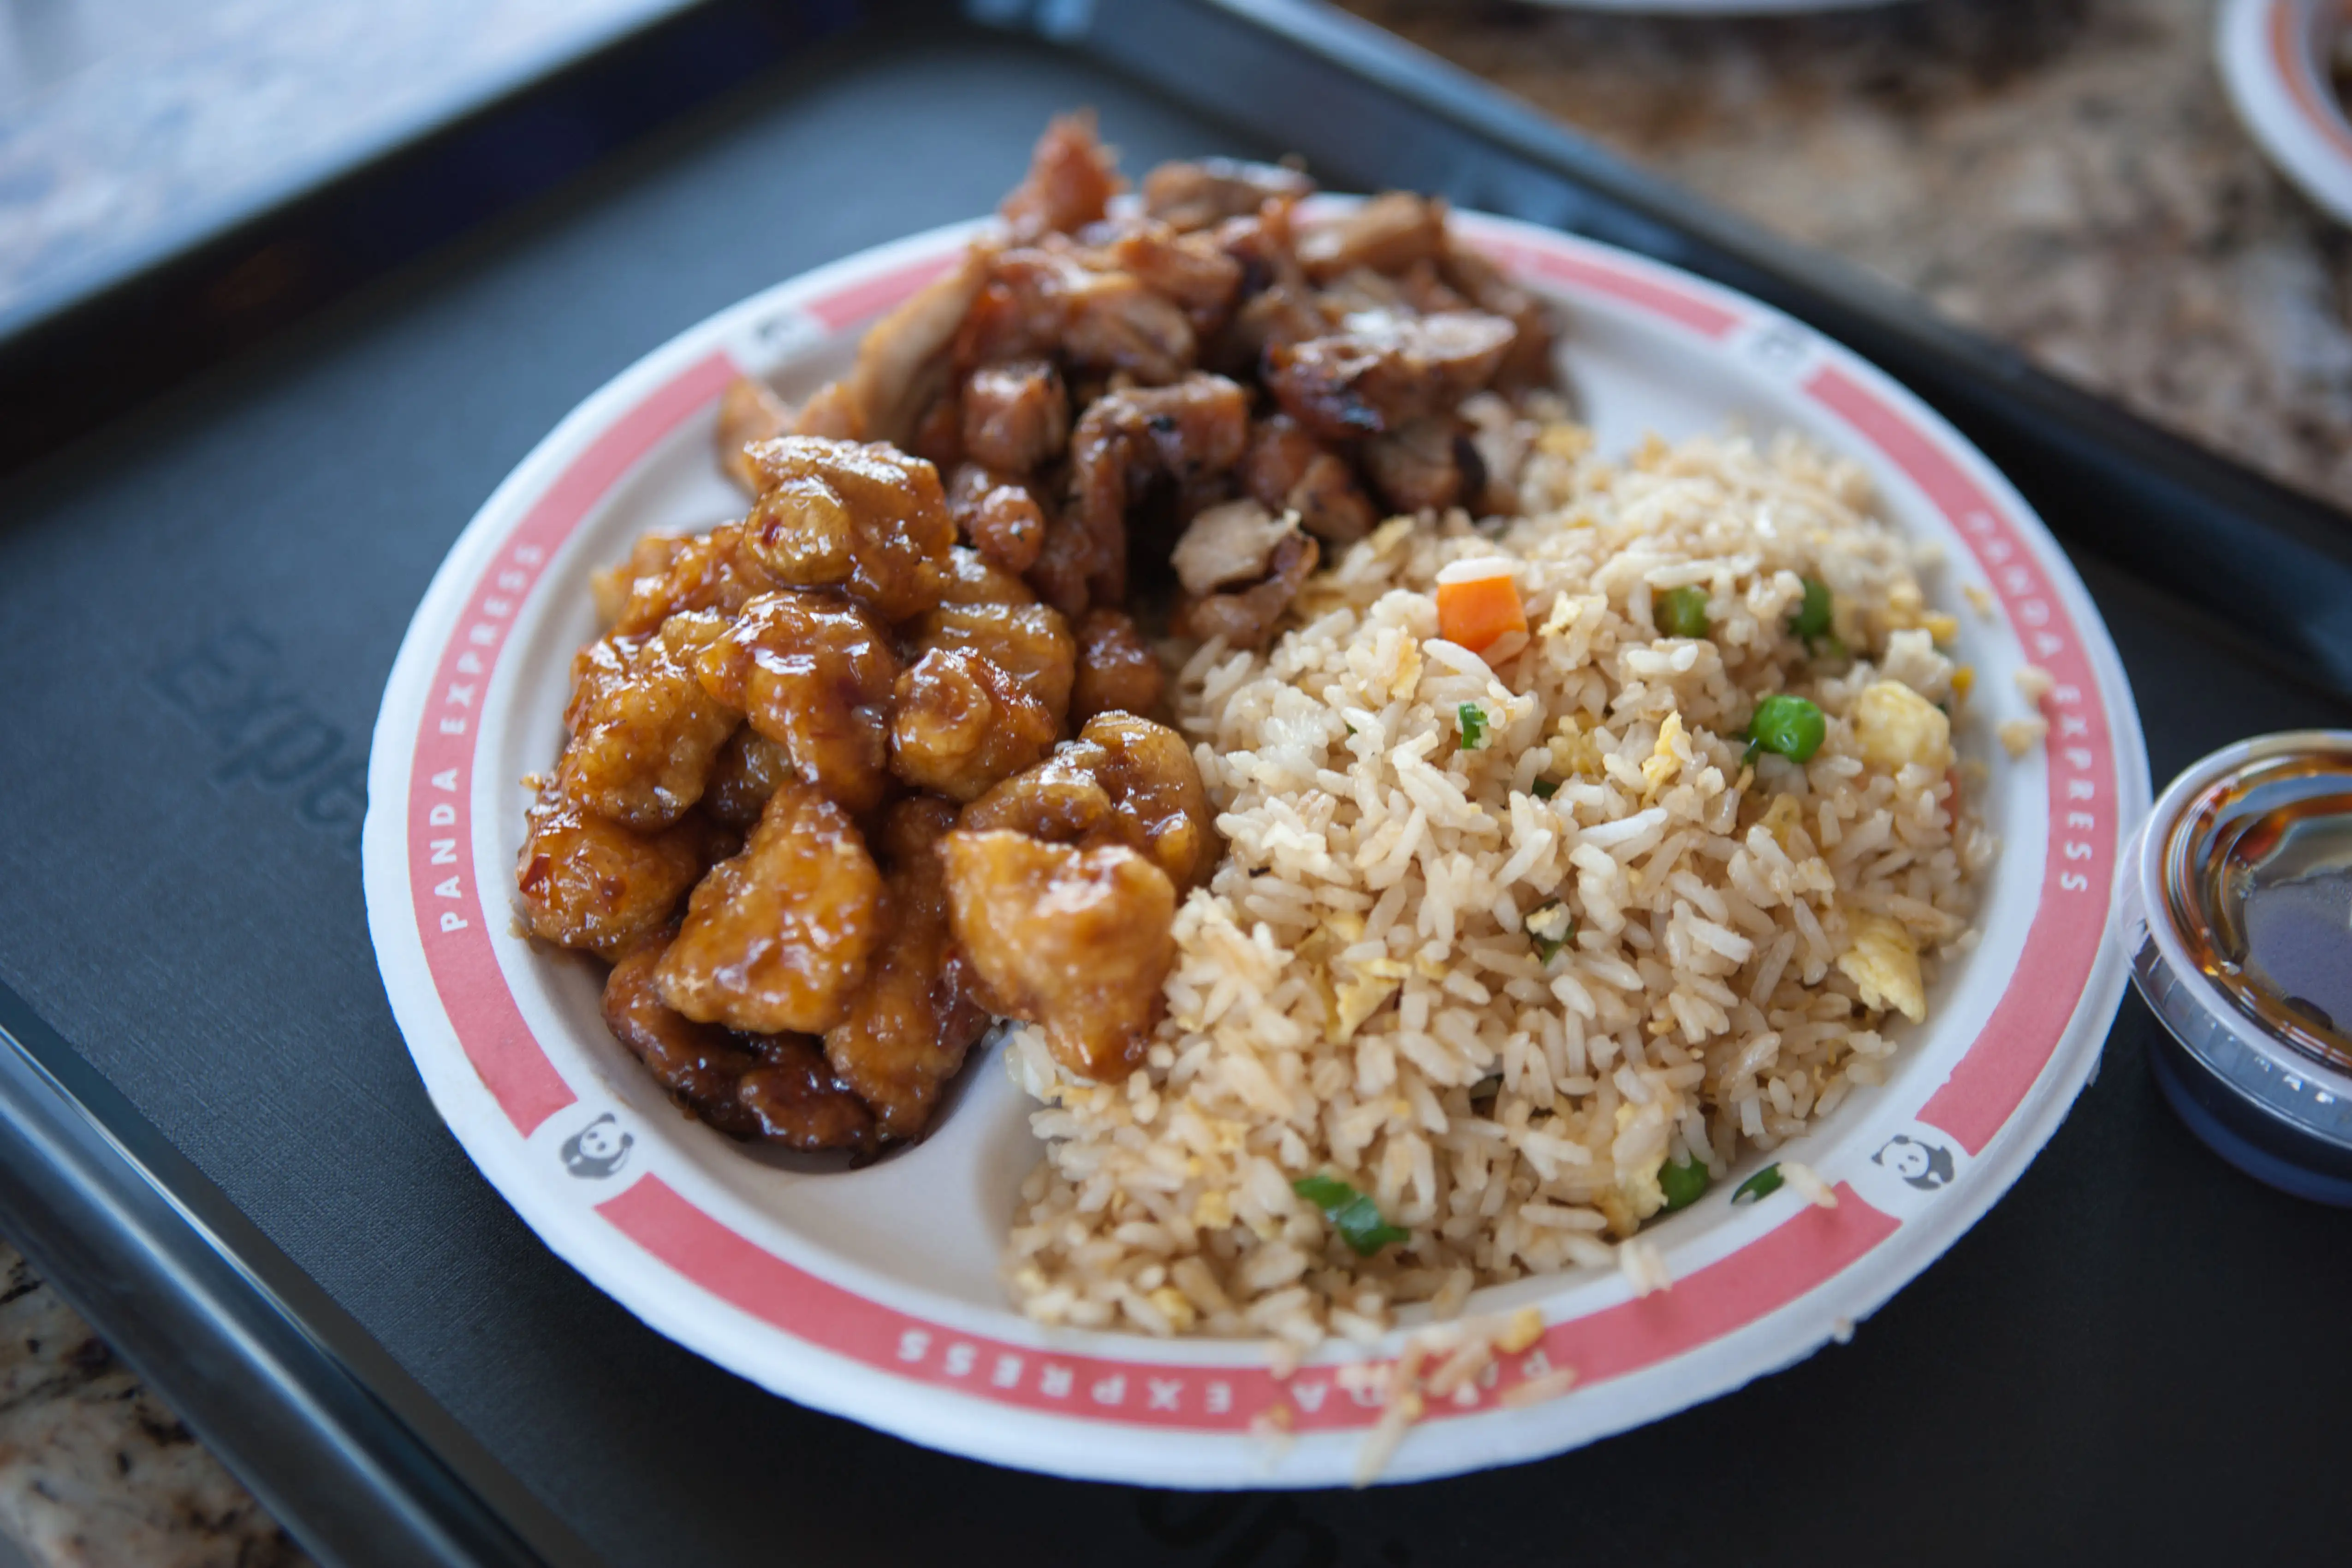 A plate of Chinese food served at the American fast food chain, Panda Express.